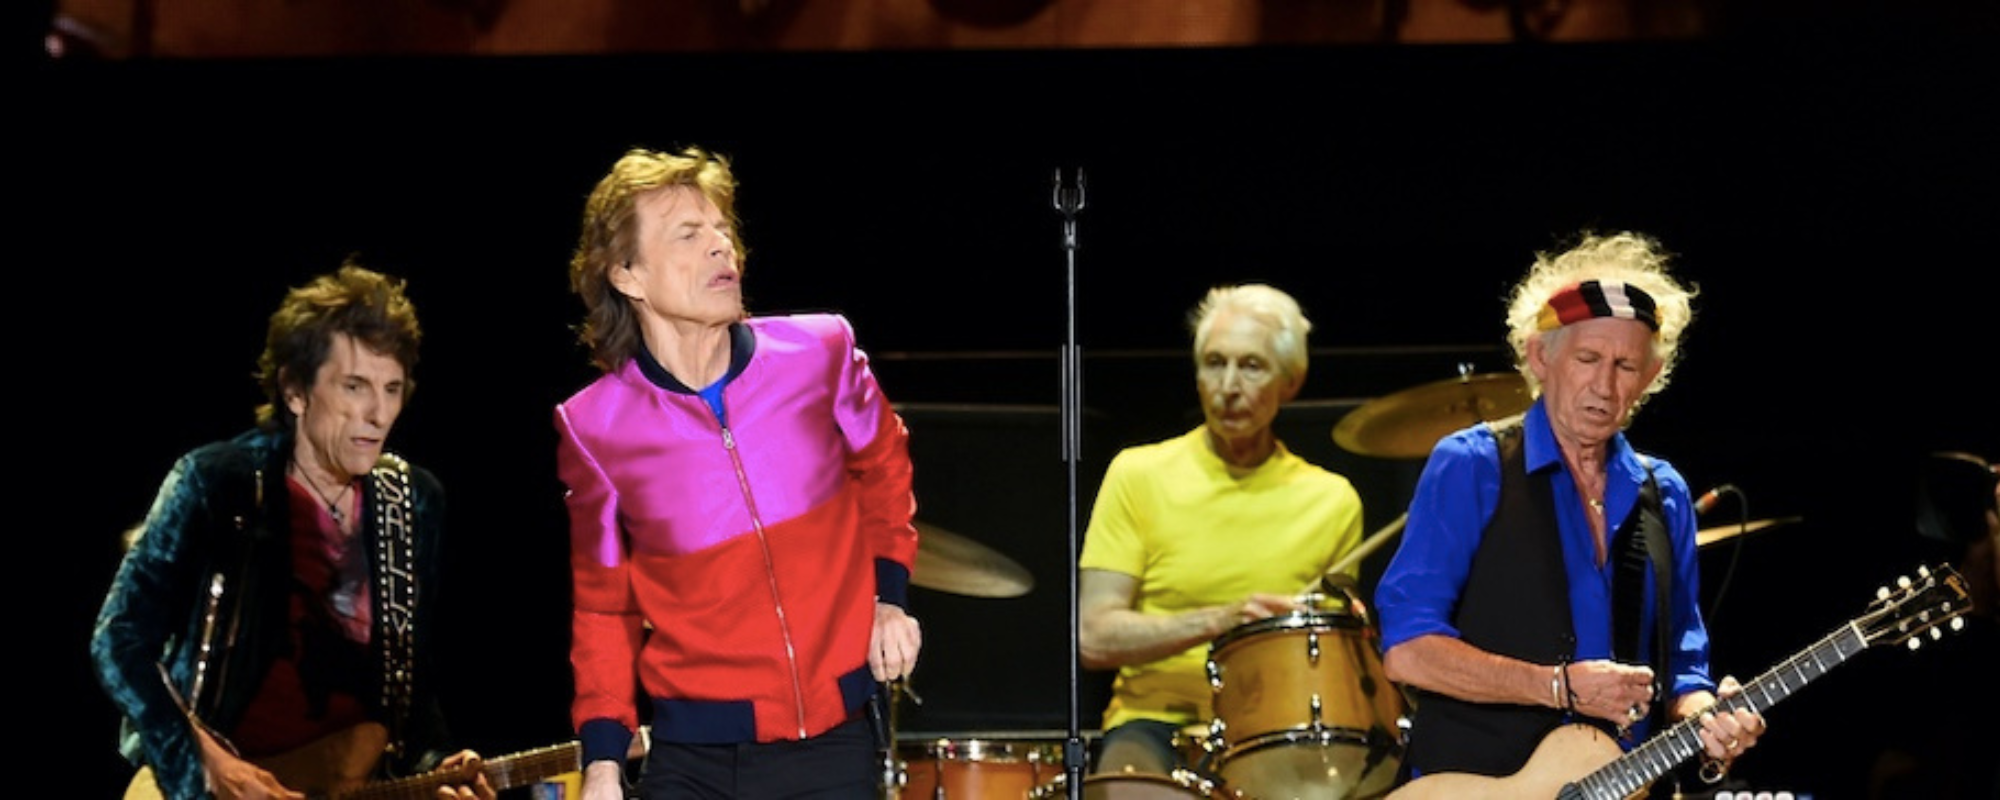 Mick Jagger Says More Rolling Stones Tracks with the Late Charlie Watts Will “Probably Come Out”